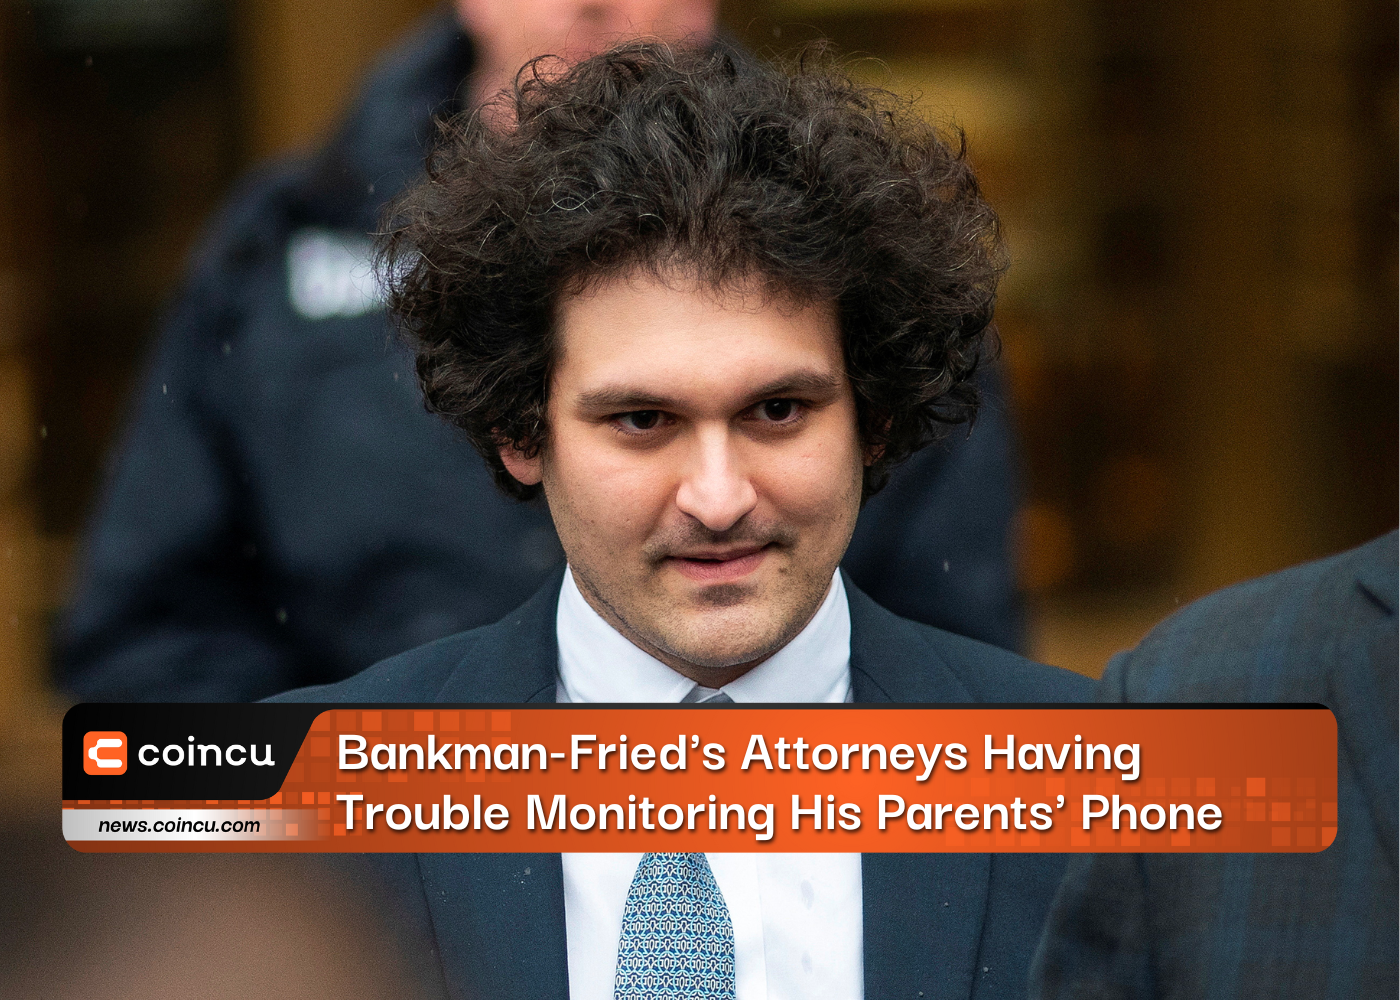 Bankman-Fried's Attorneys Having Trouble Monitoring His Parents' Phone